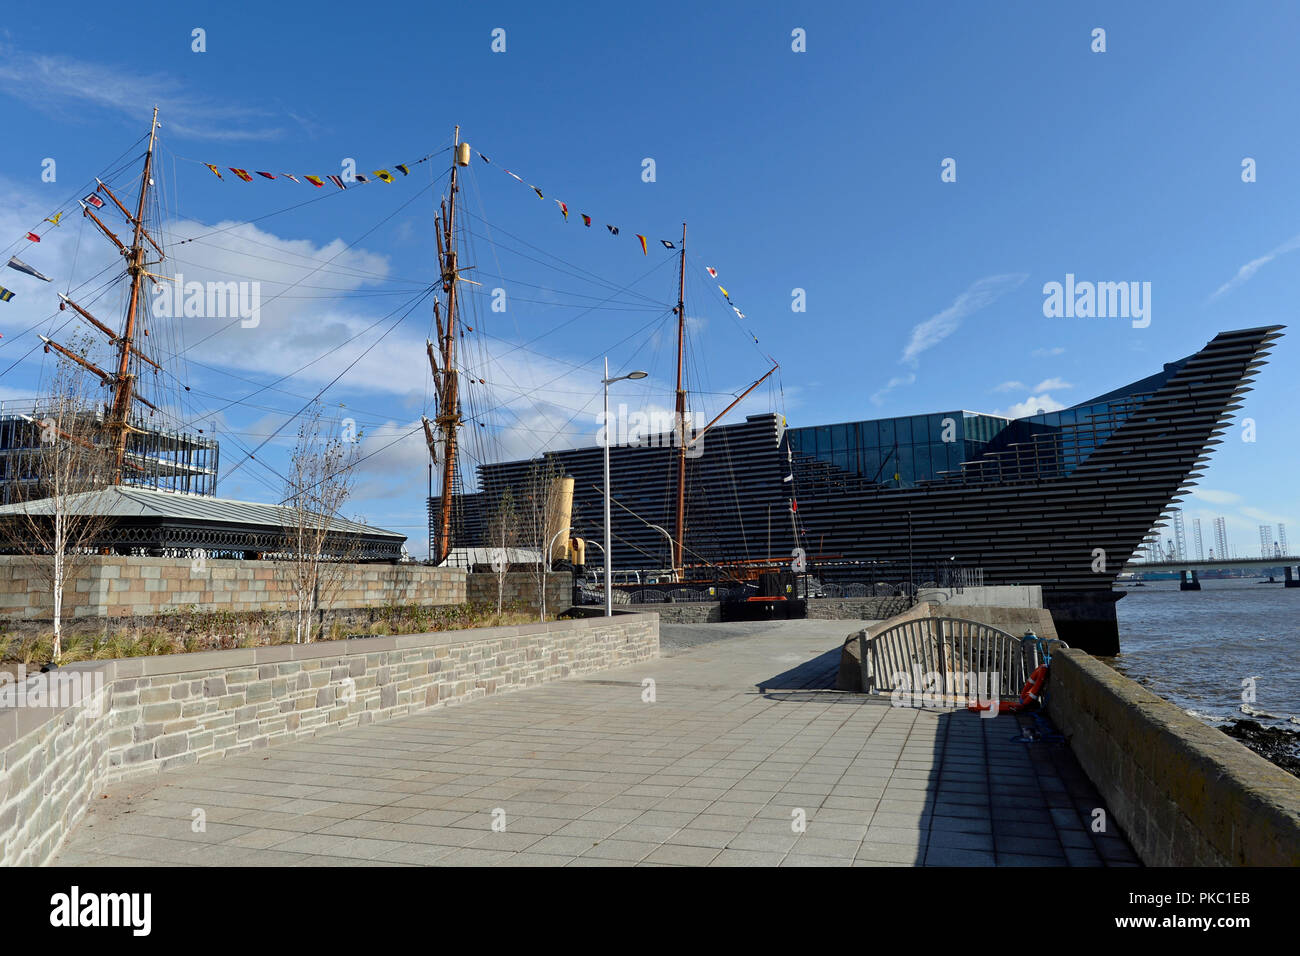 Dundee, Scotland, United Kingdom, 12, September, 2018. The new V & A Dundee museum ahead of the grand opening on Saturday, with Captain Scott's ship Discovery in the foreground, September 15, 2018. © Ken Jack / Alamy Live News Stock Photo